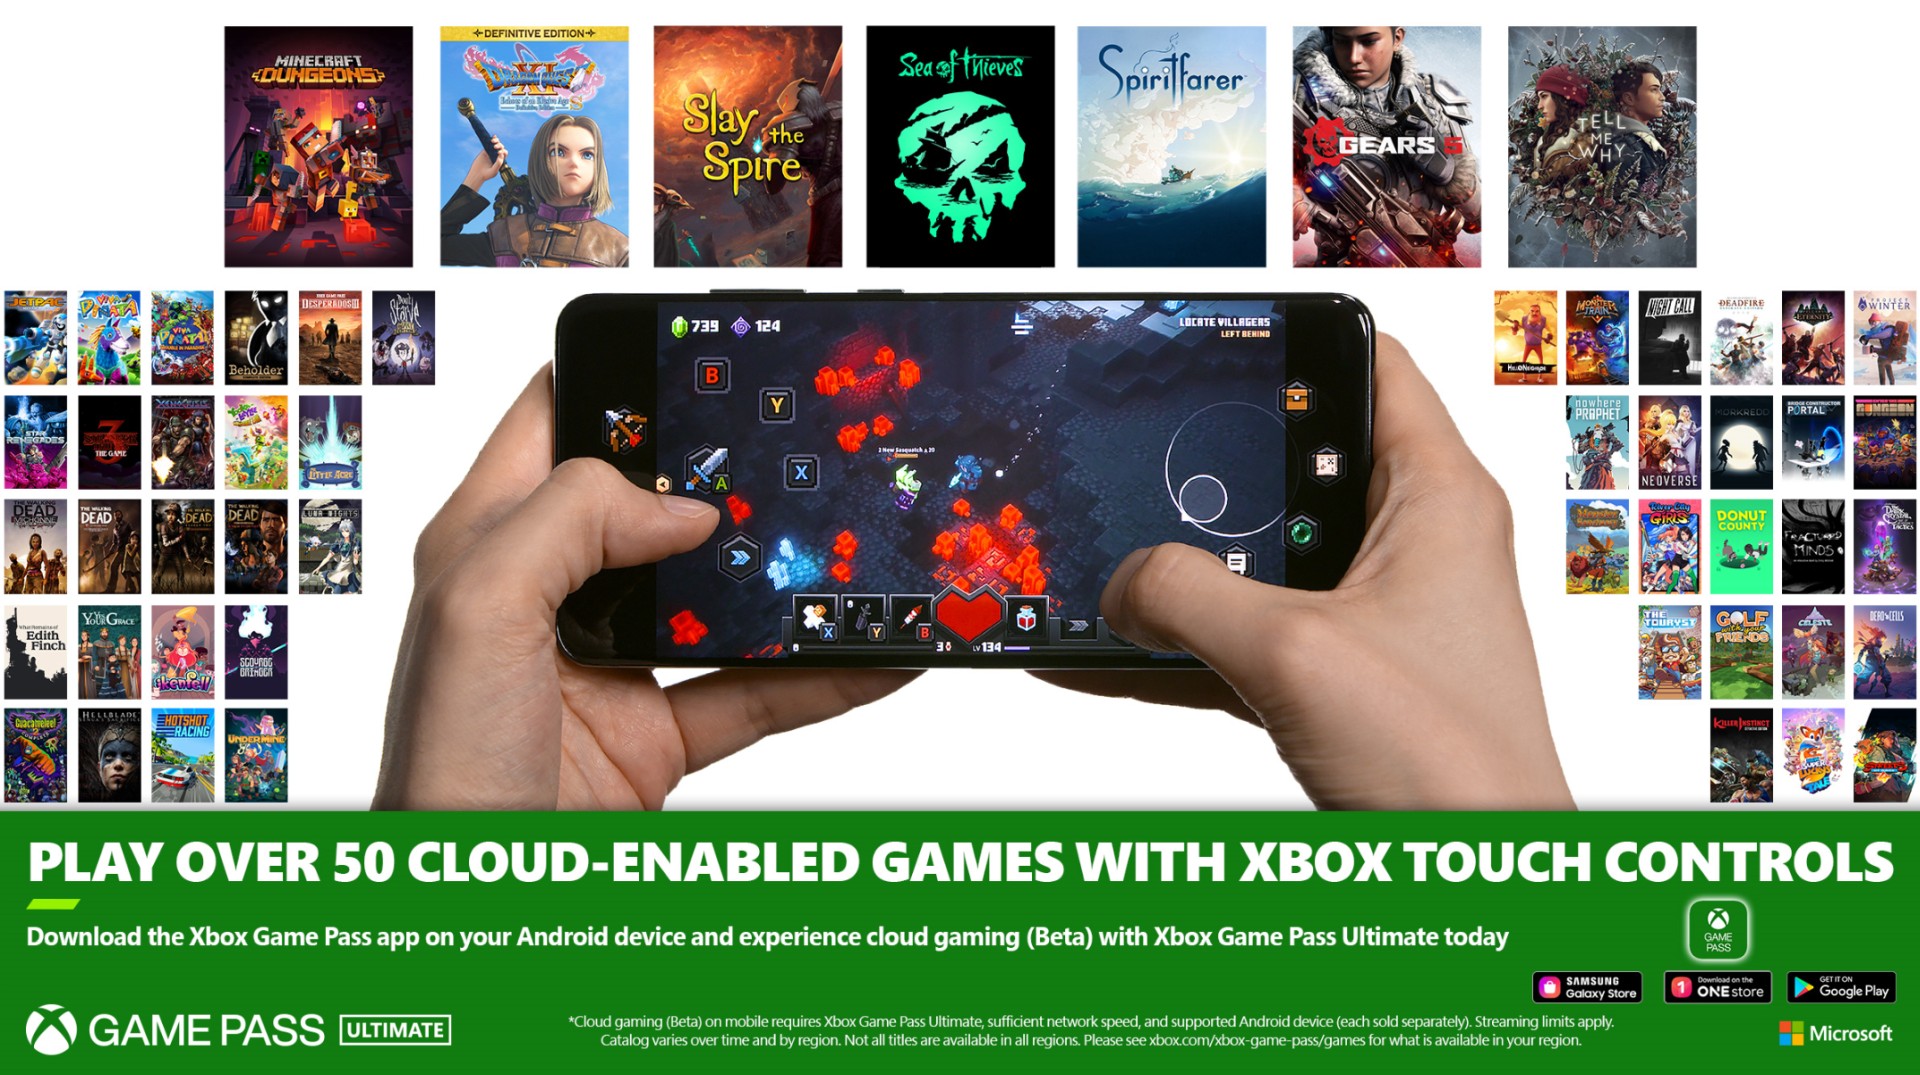 Xbox Touch controls